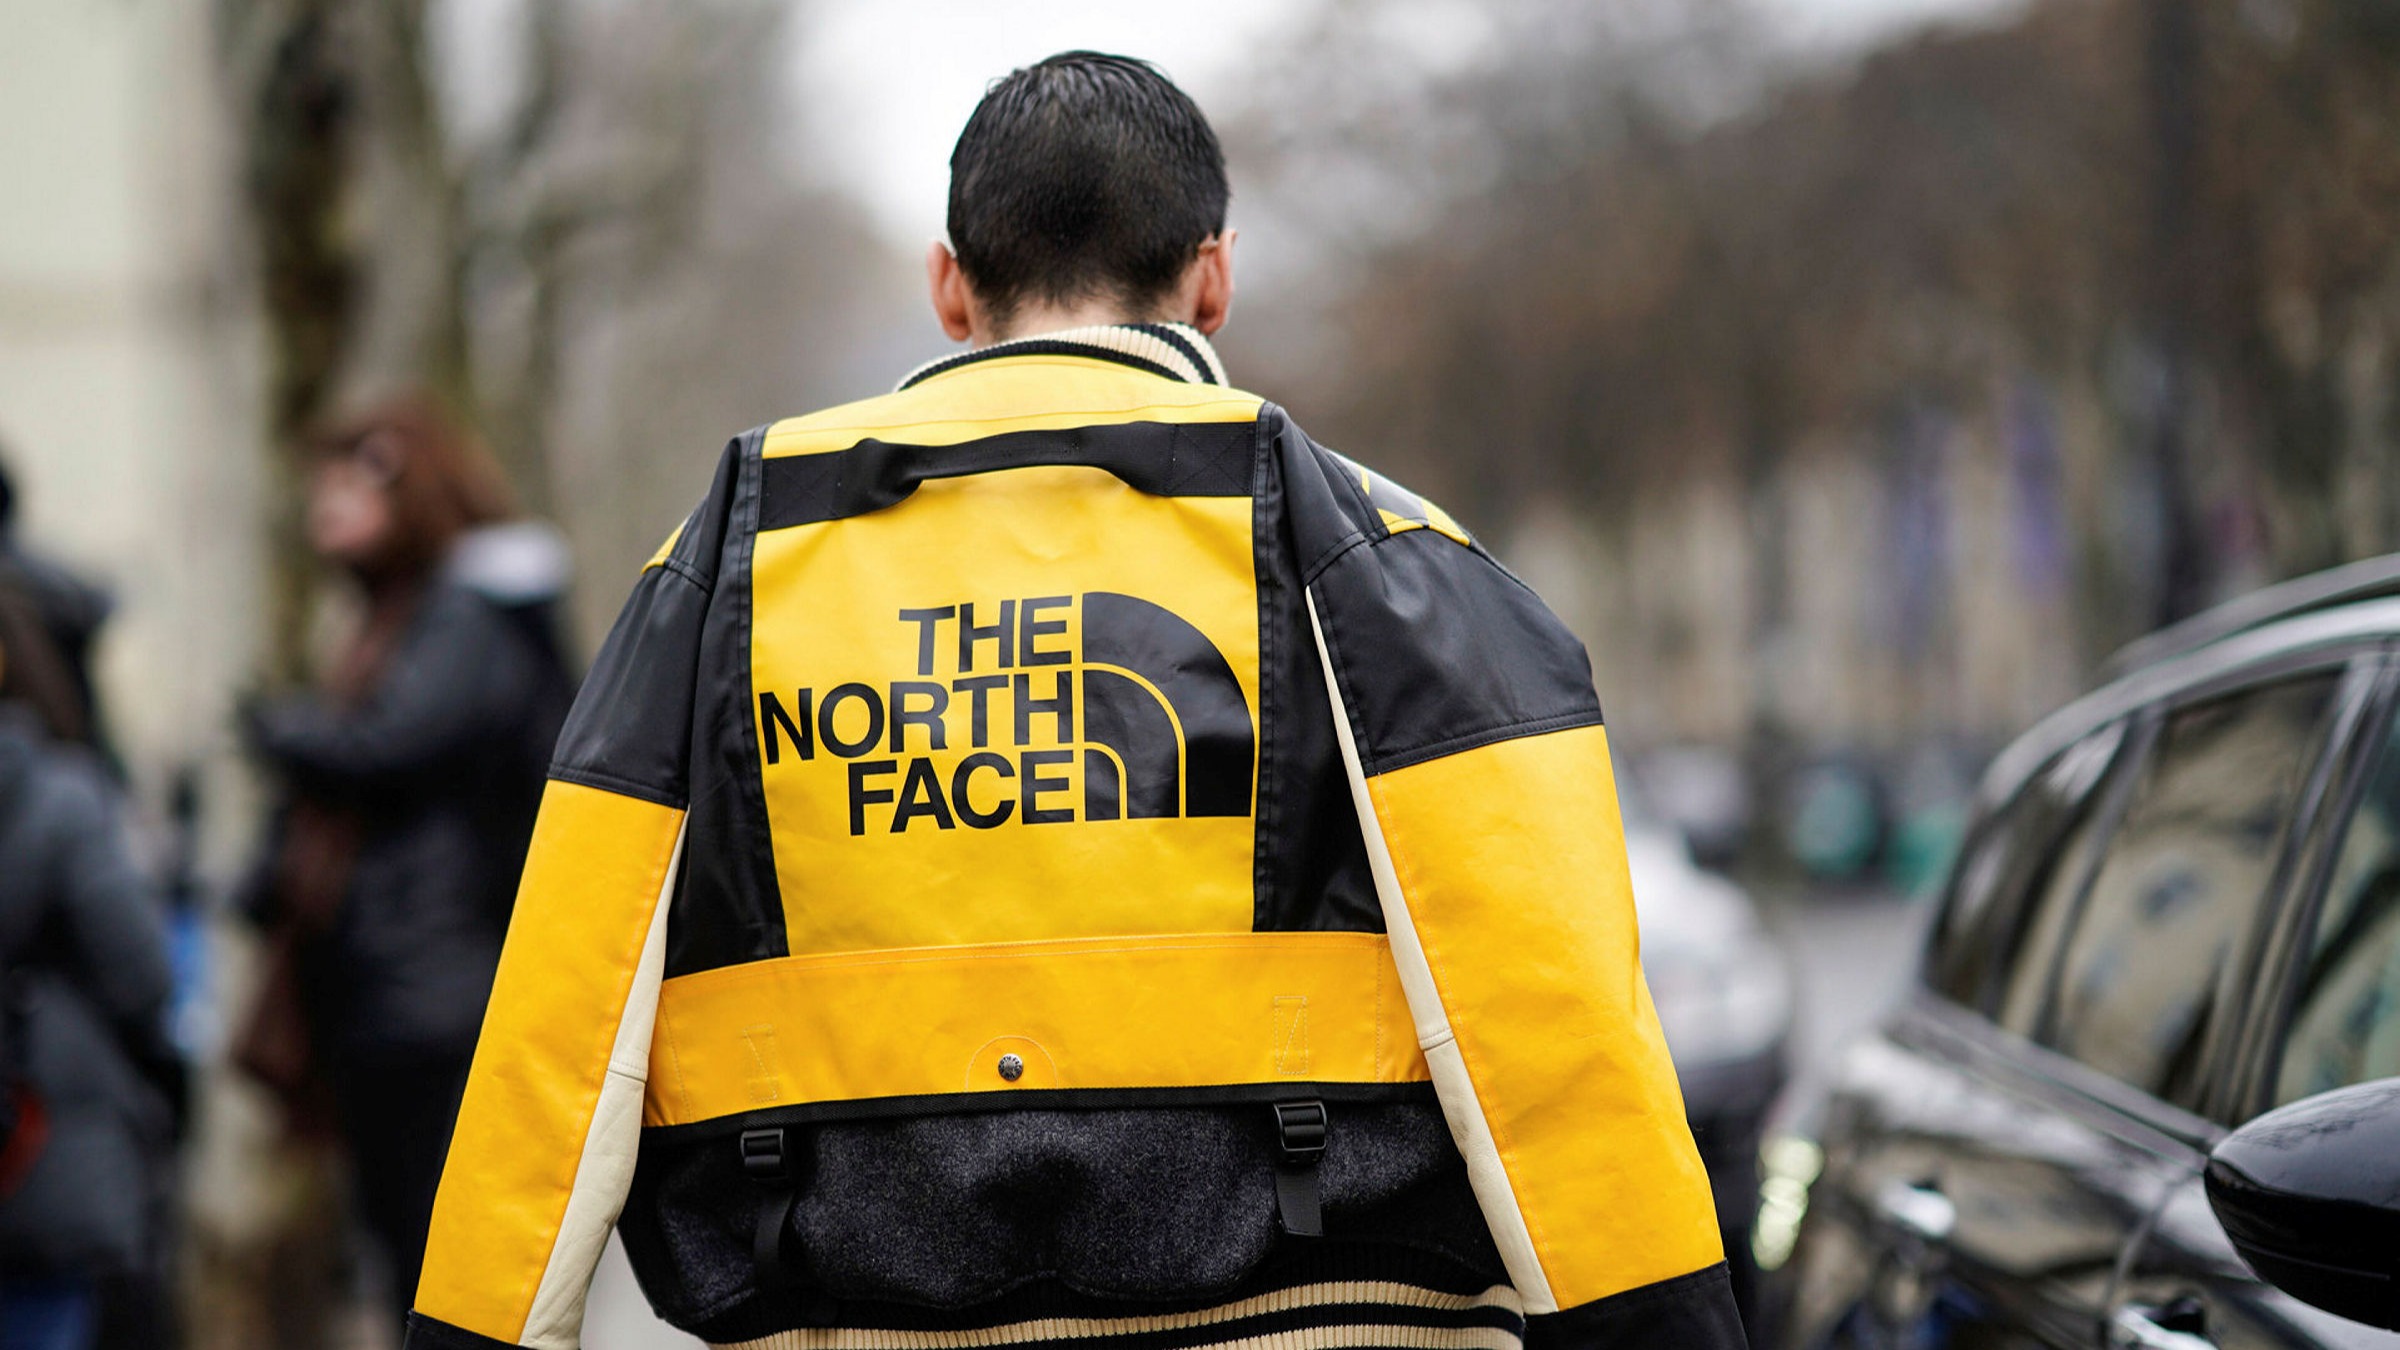 the north face clothing company